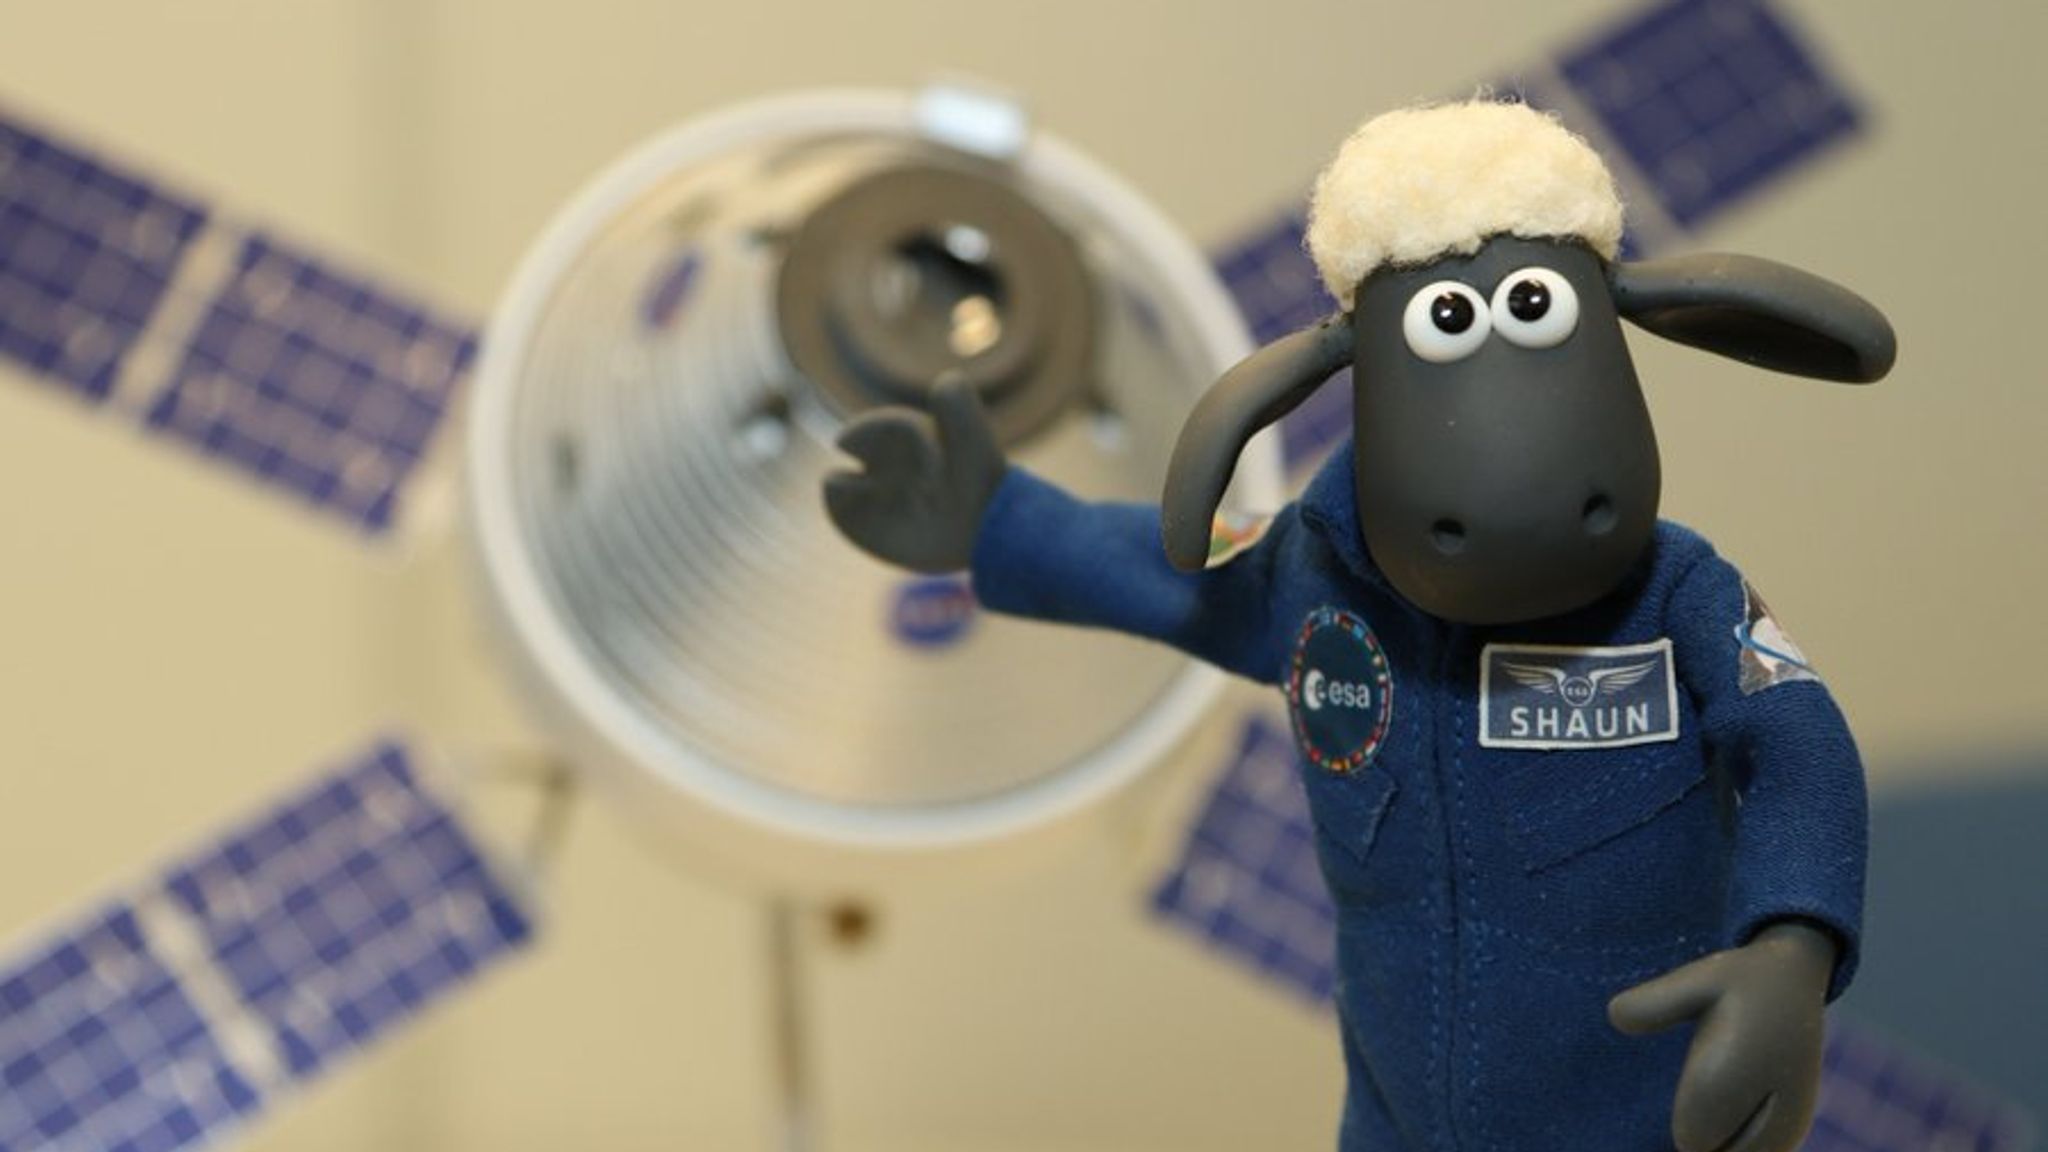 Ewe-ston we have a problem: Shaun the Sheep named as astronaut aboard NASA  lunar mission | Science & Tech News | Sky News